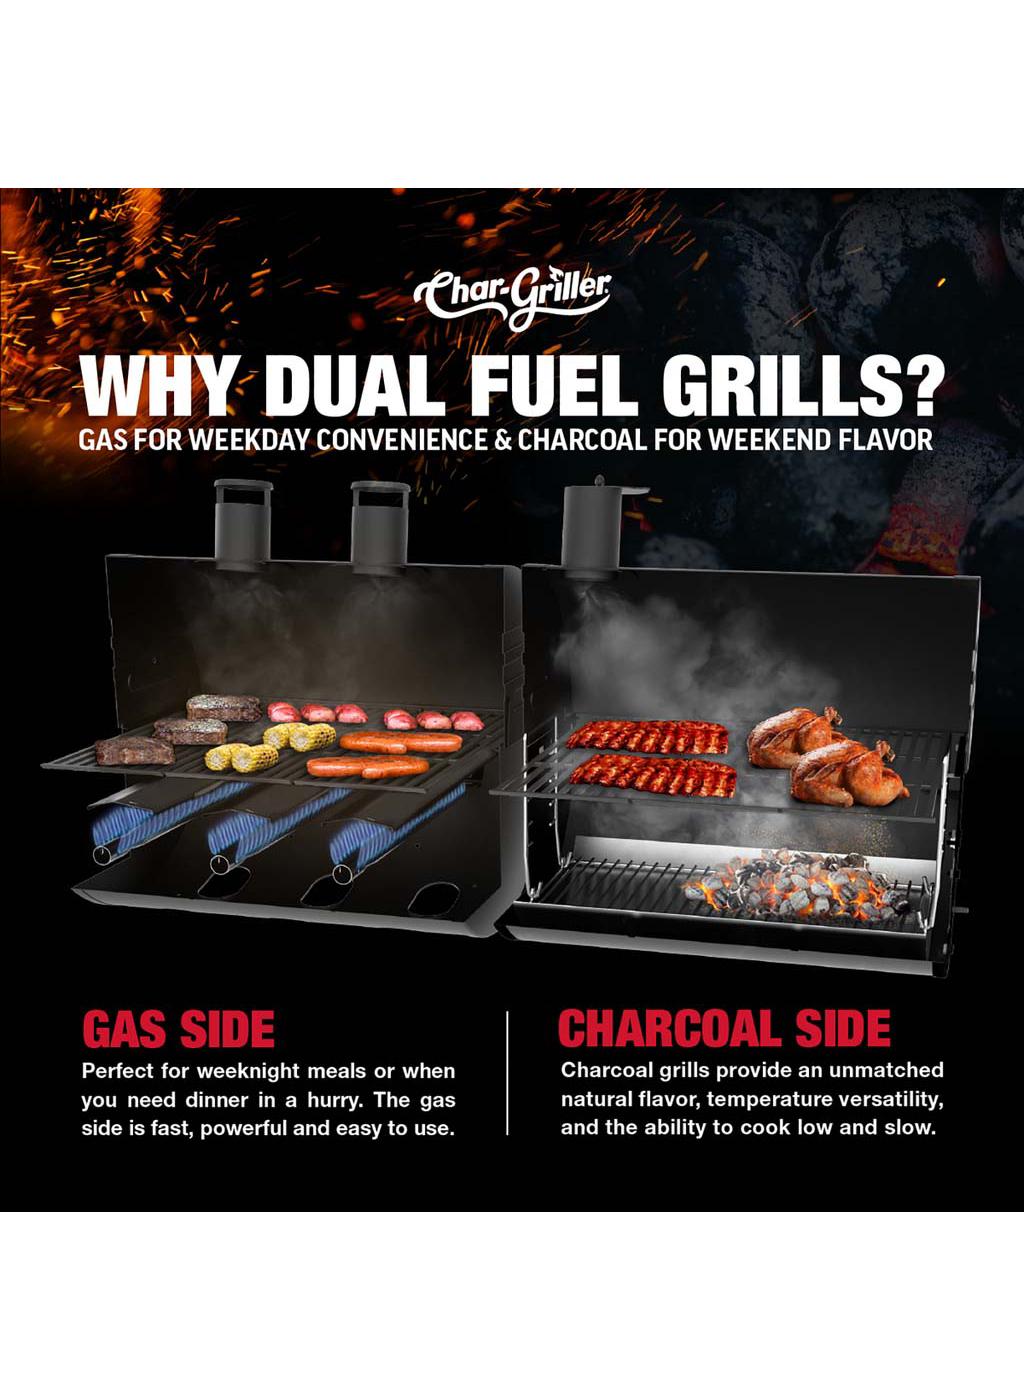 Char-Griller Duo Gas & Charcoal Grill; image 9 of 9